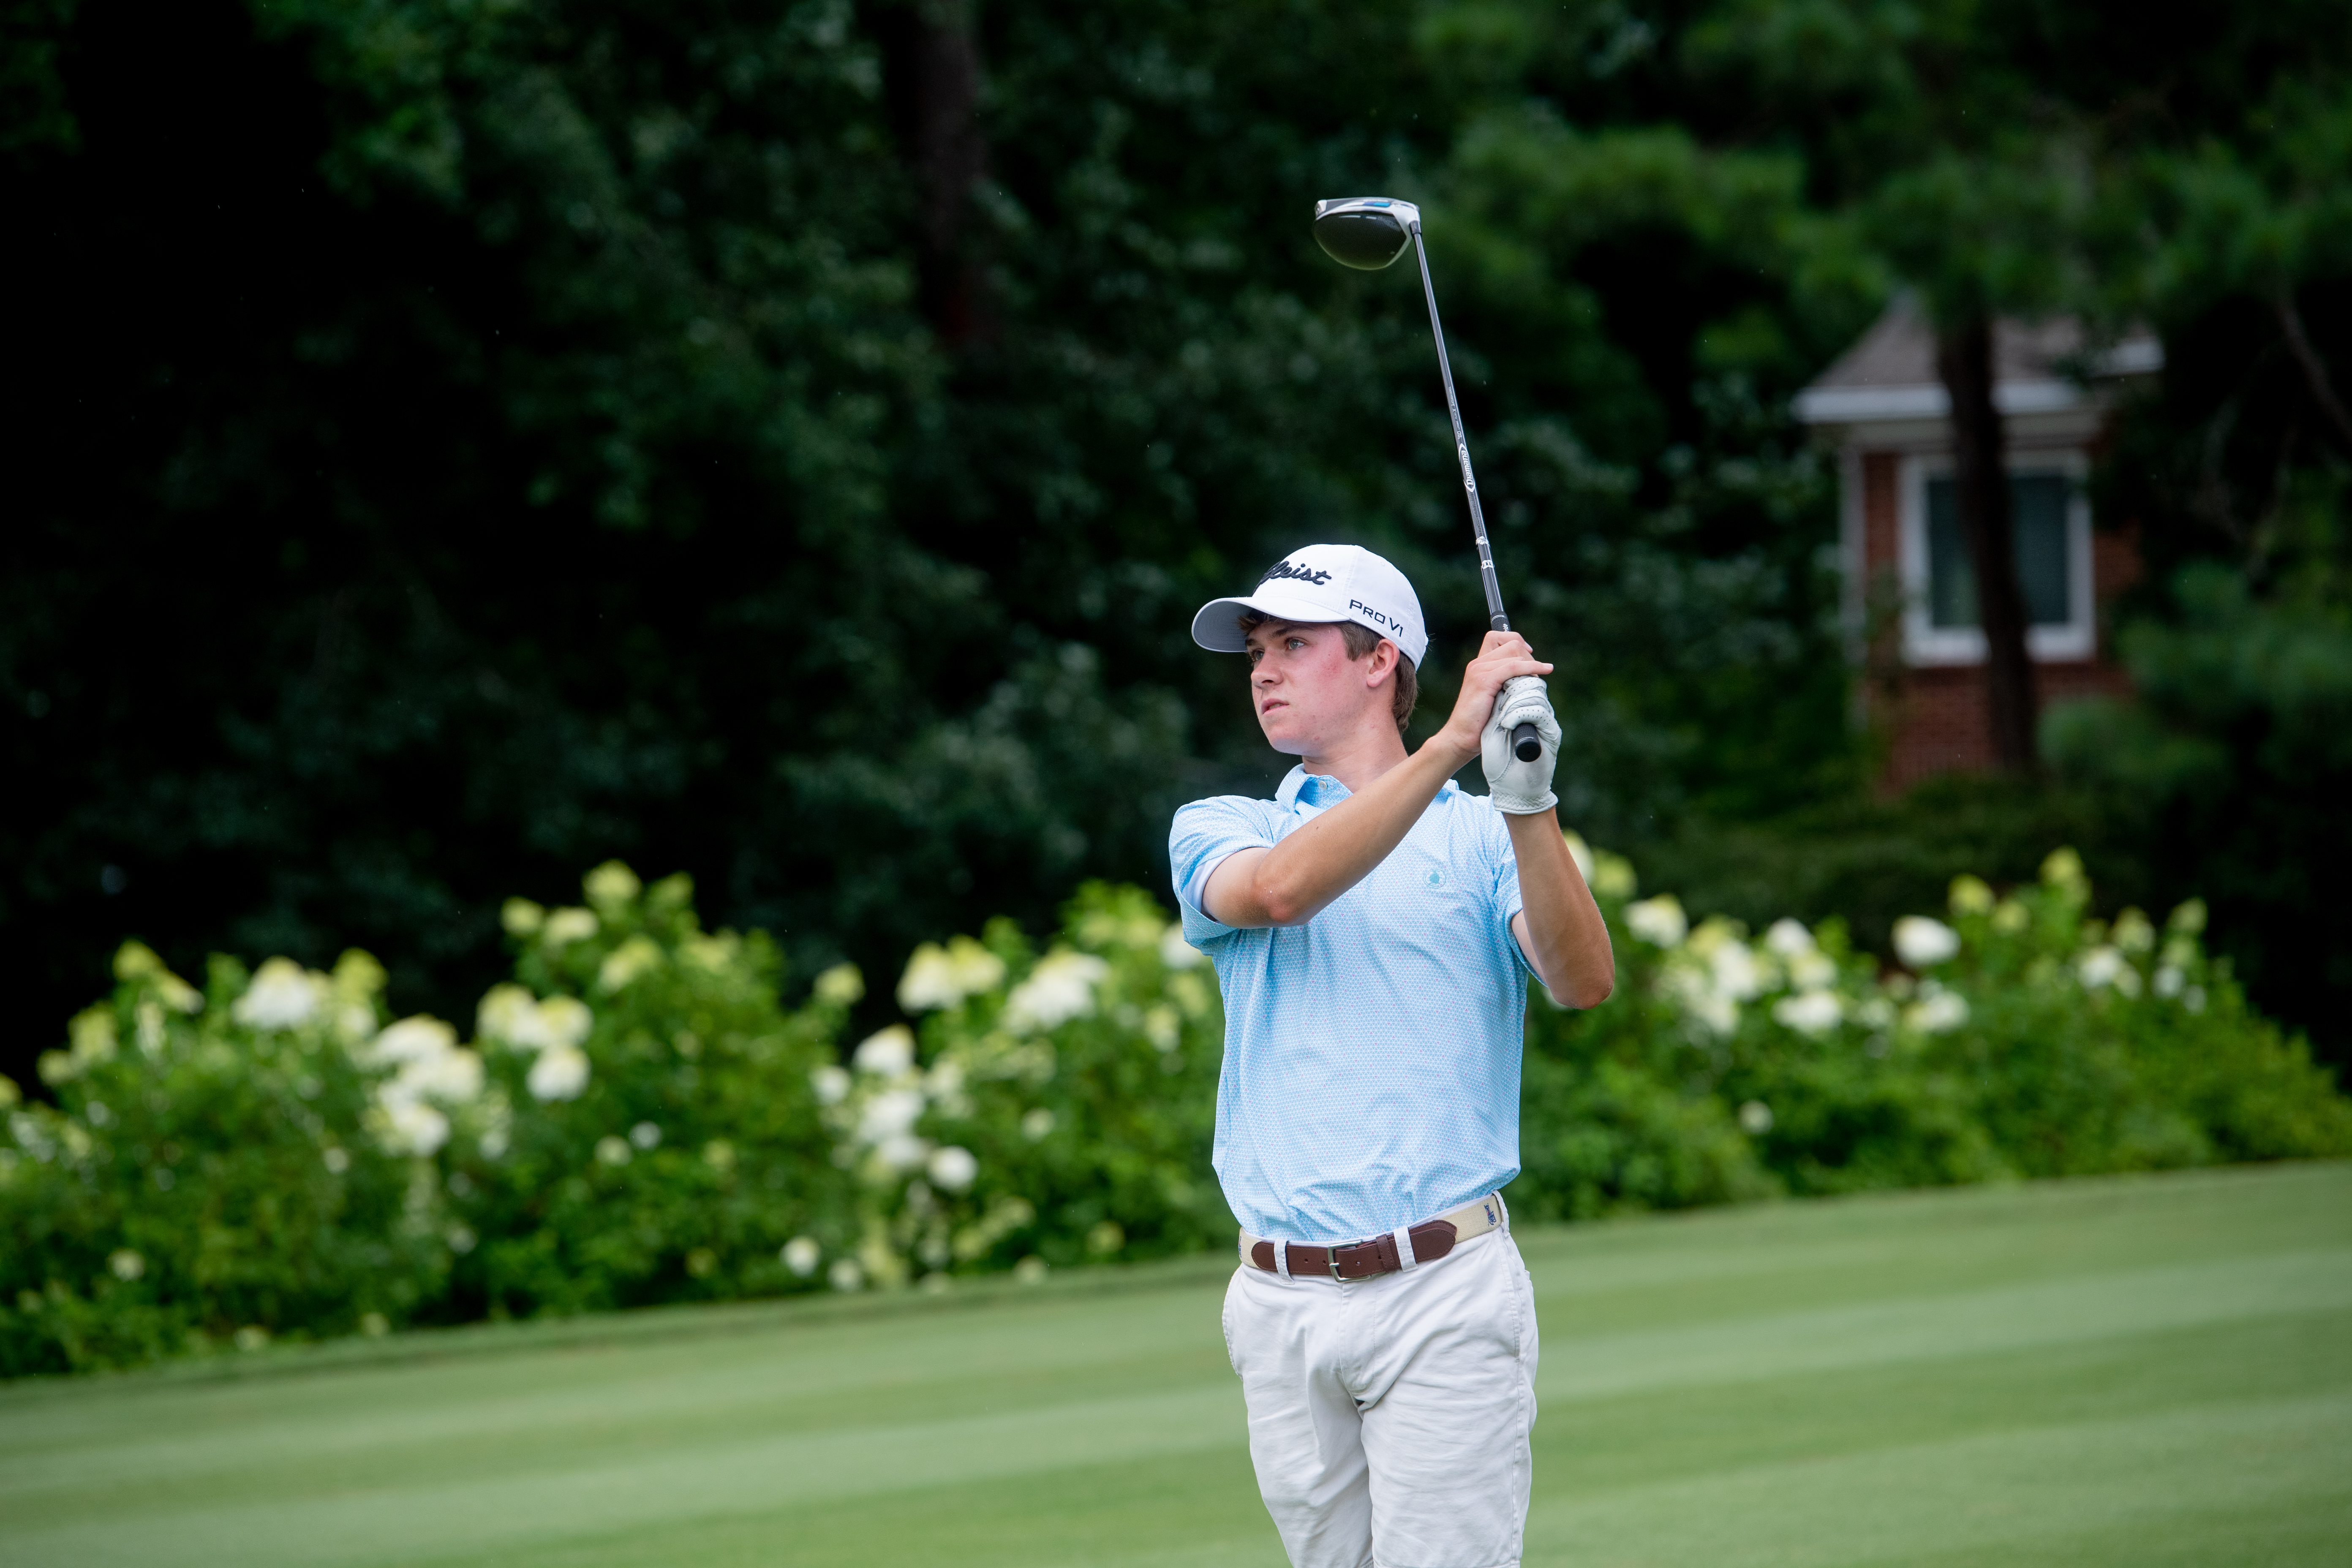 Top boys golfers to watch this spring